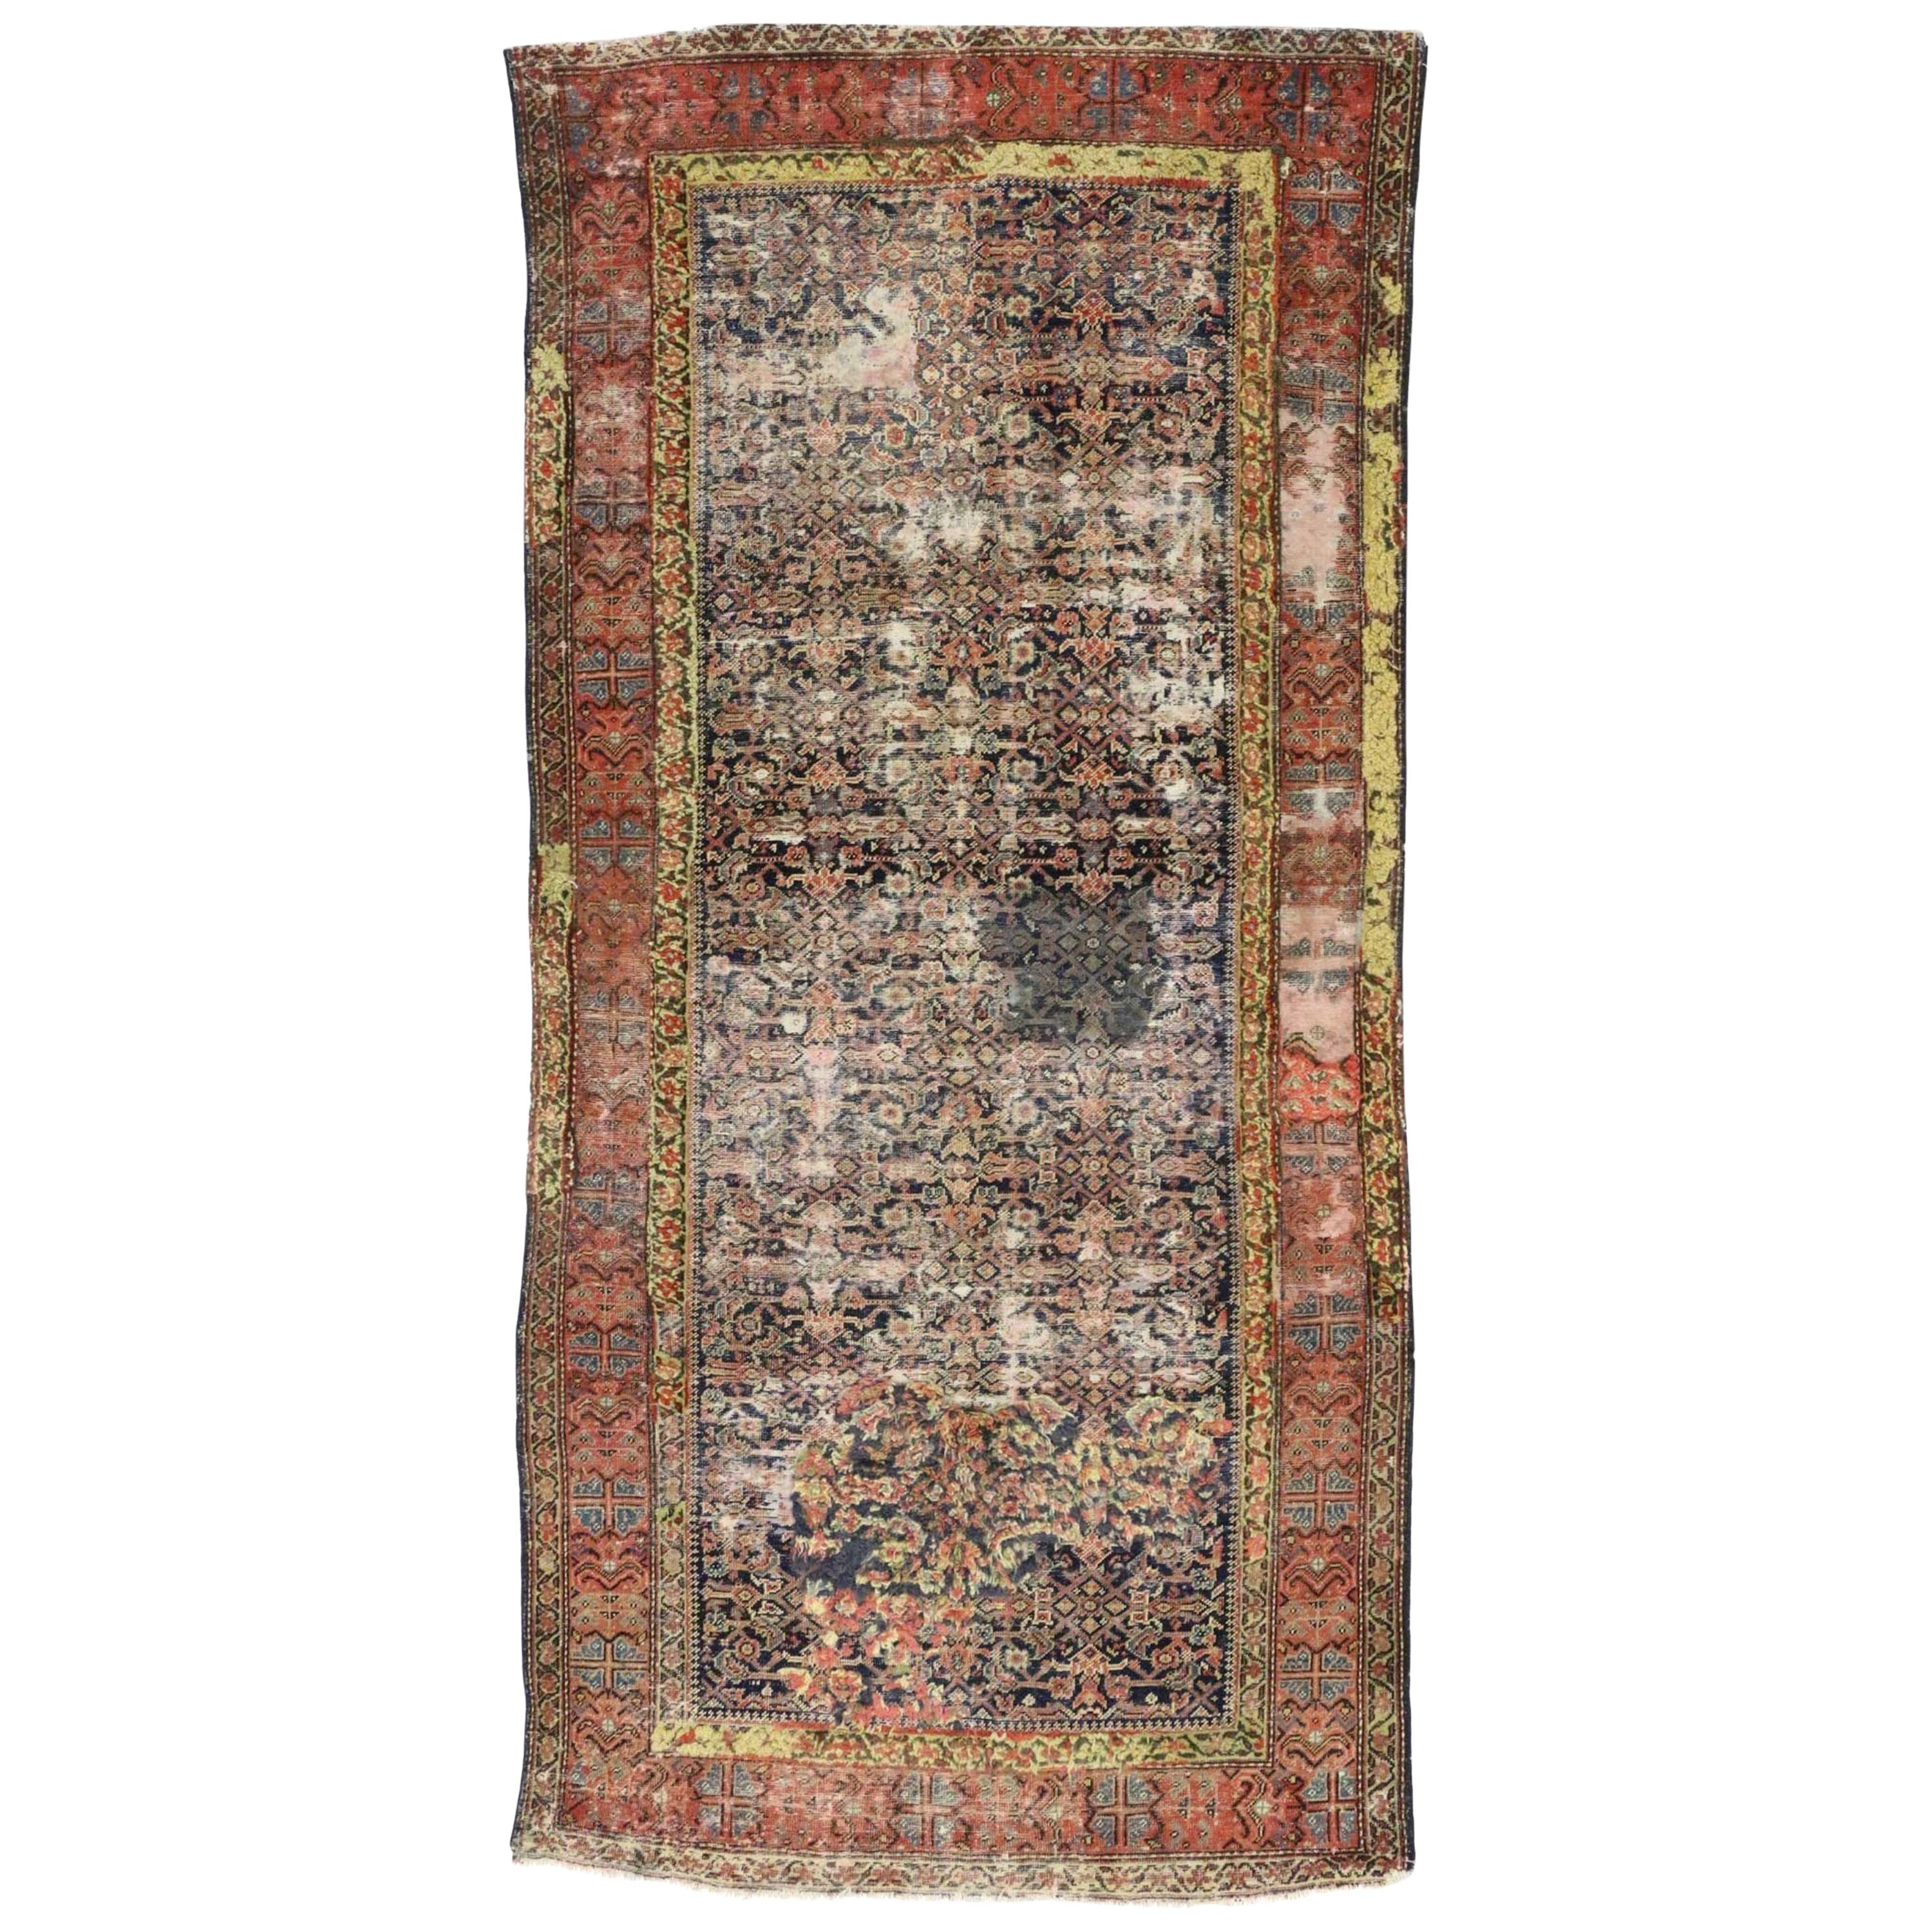 Distressed Antique Malayer Gallery Rug, Weathered and Worn Hallway Runner